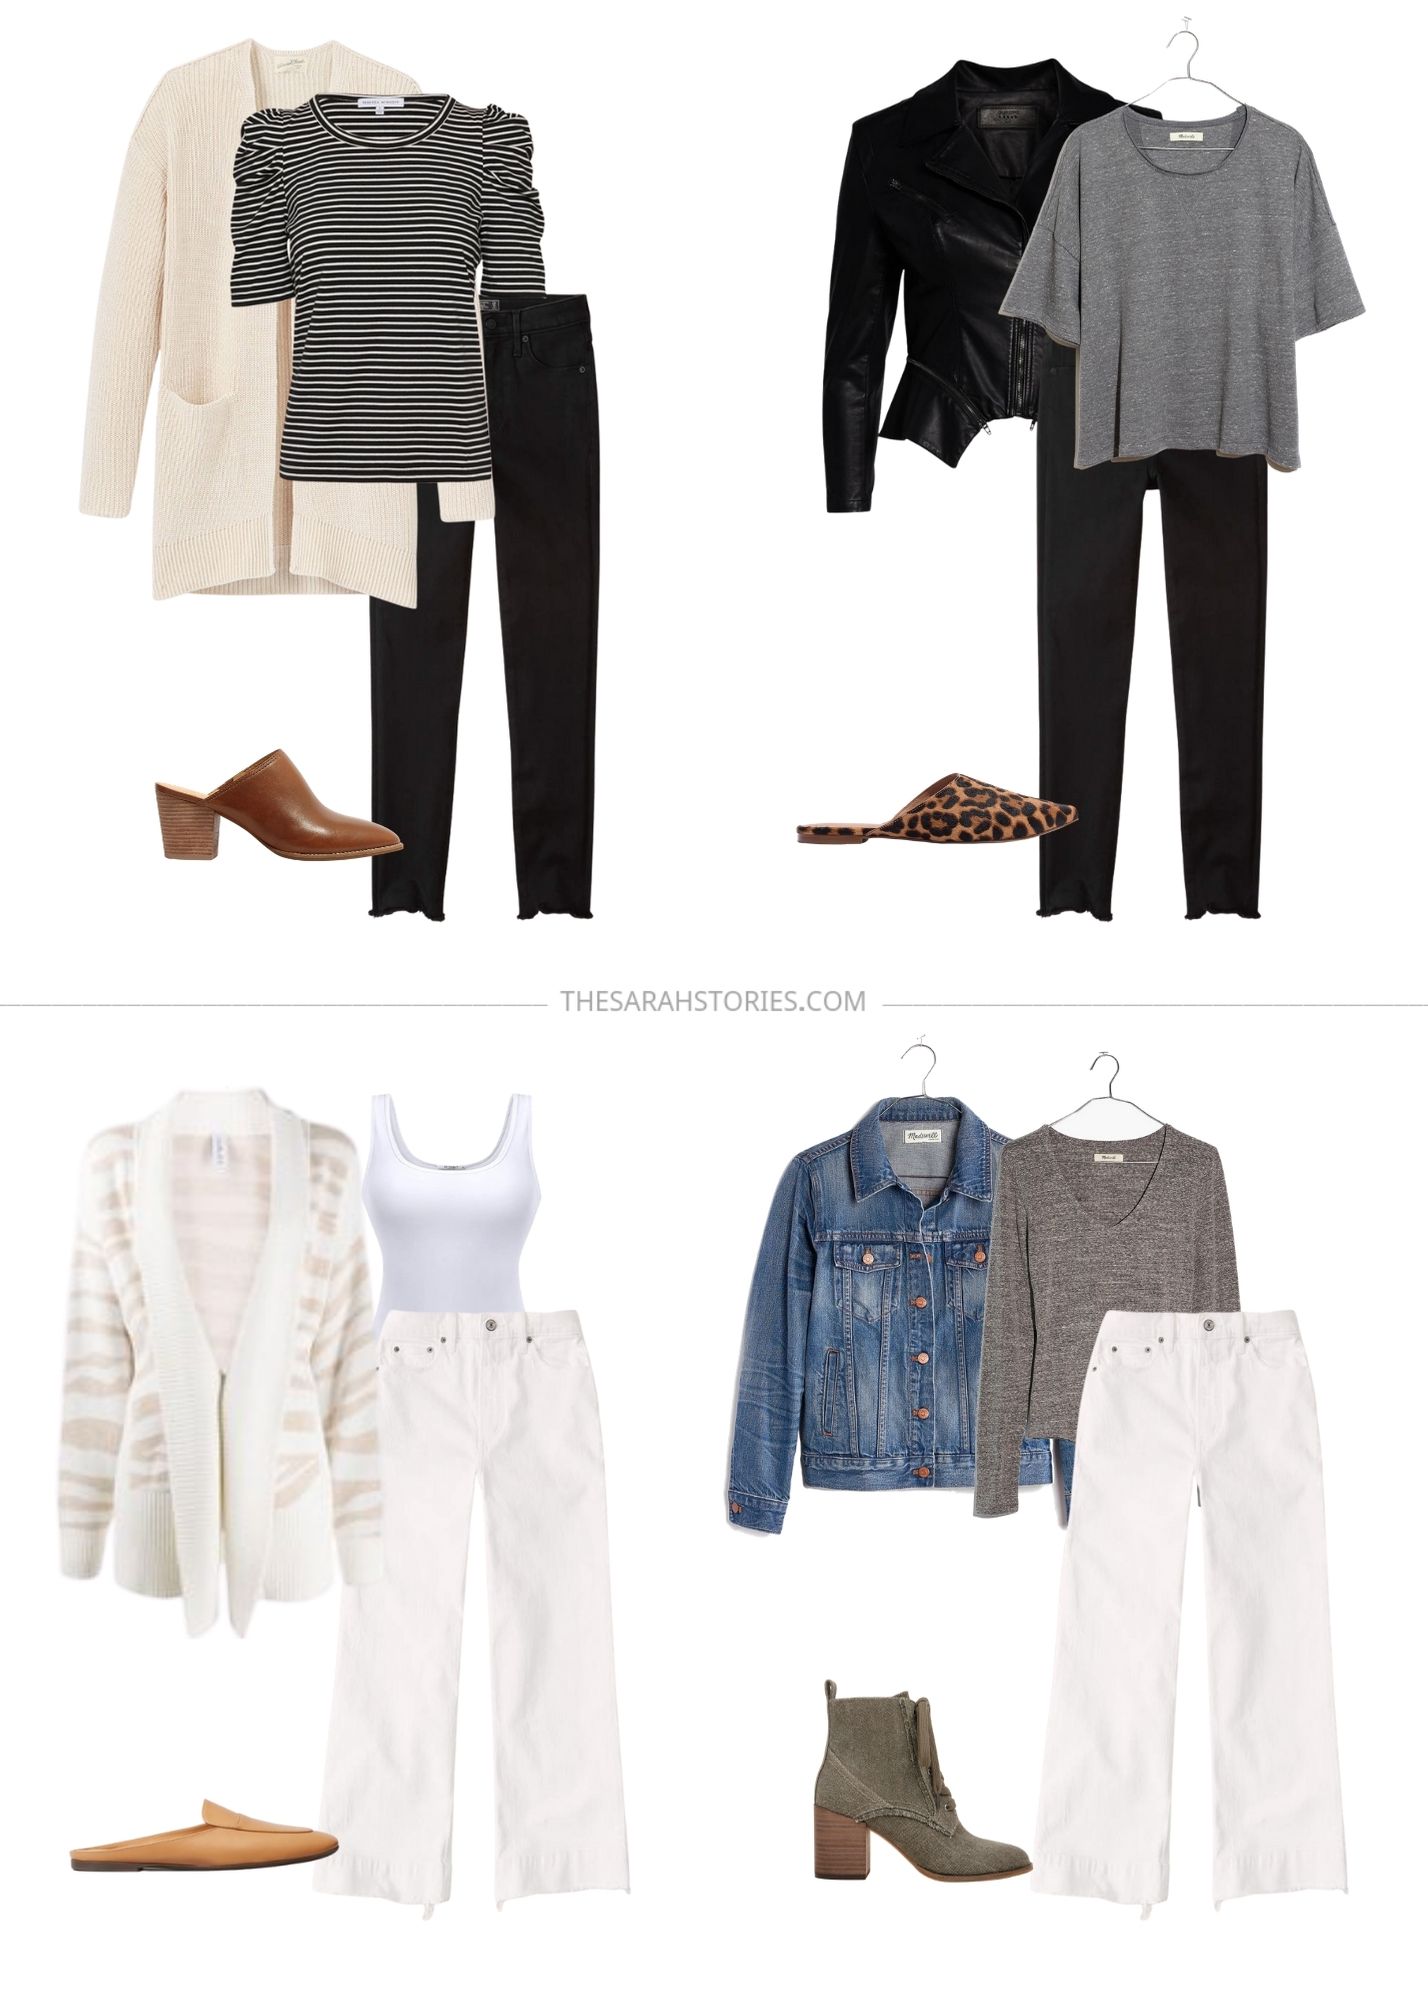 2020 Fall Capsule Wardrobe | + 24 outfit ideas - the Sarah Stories